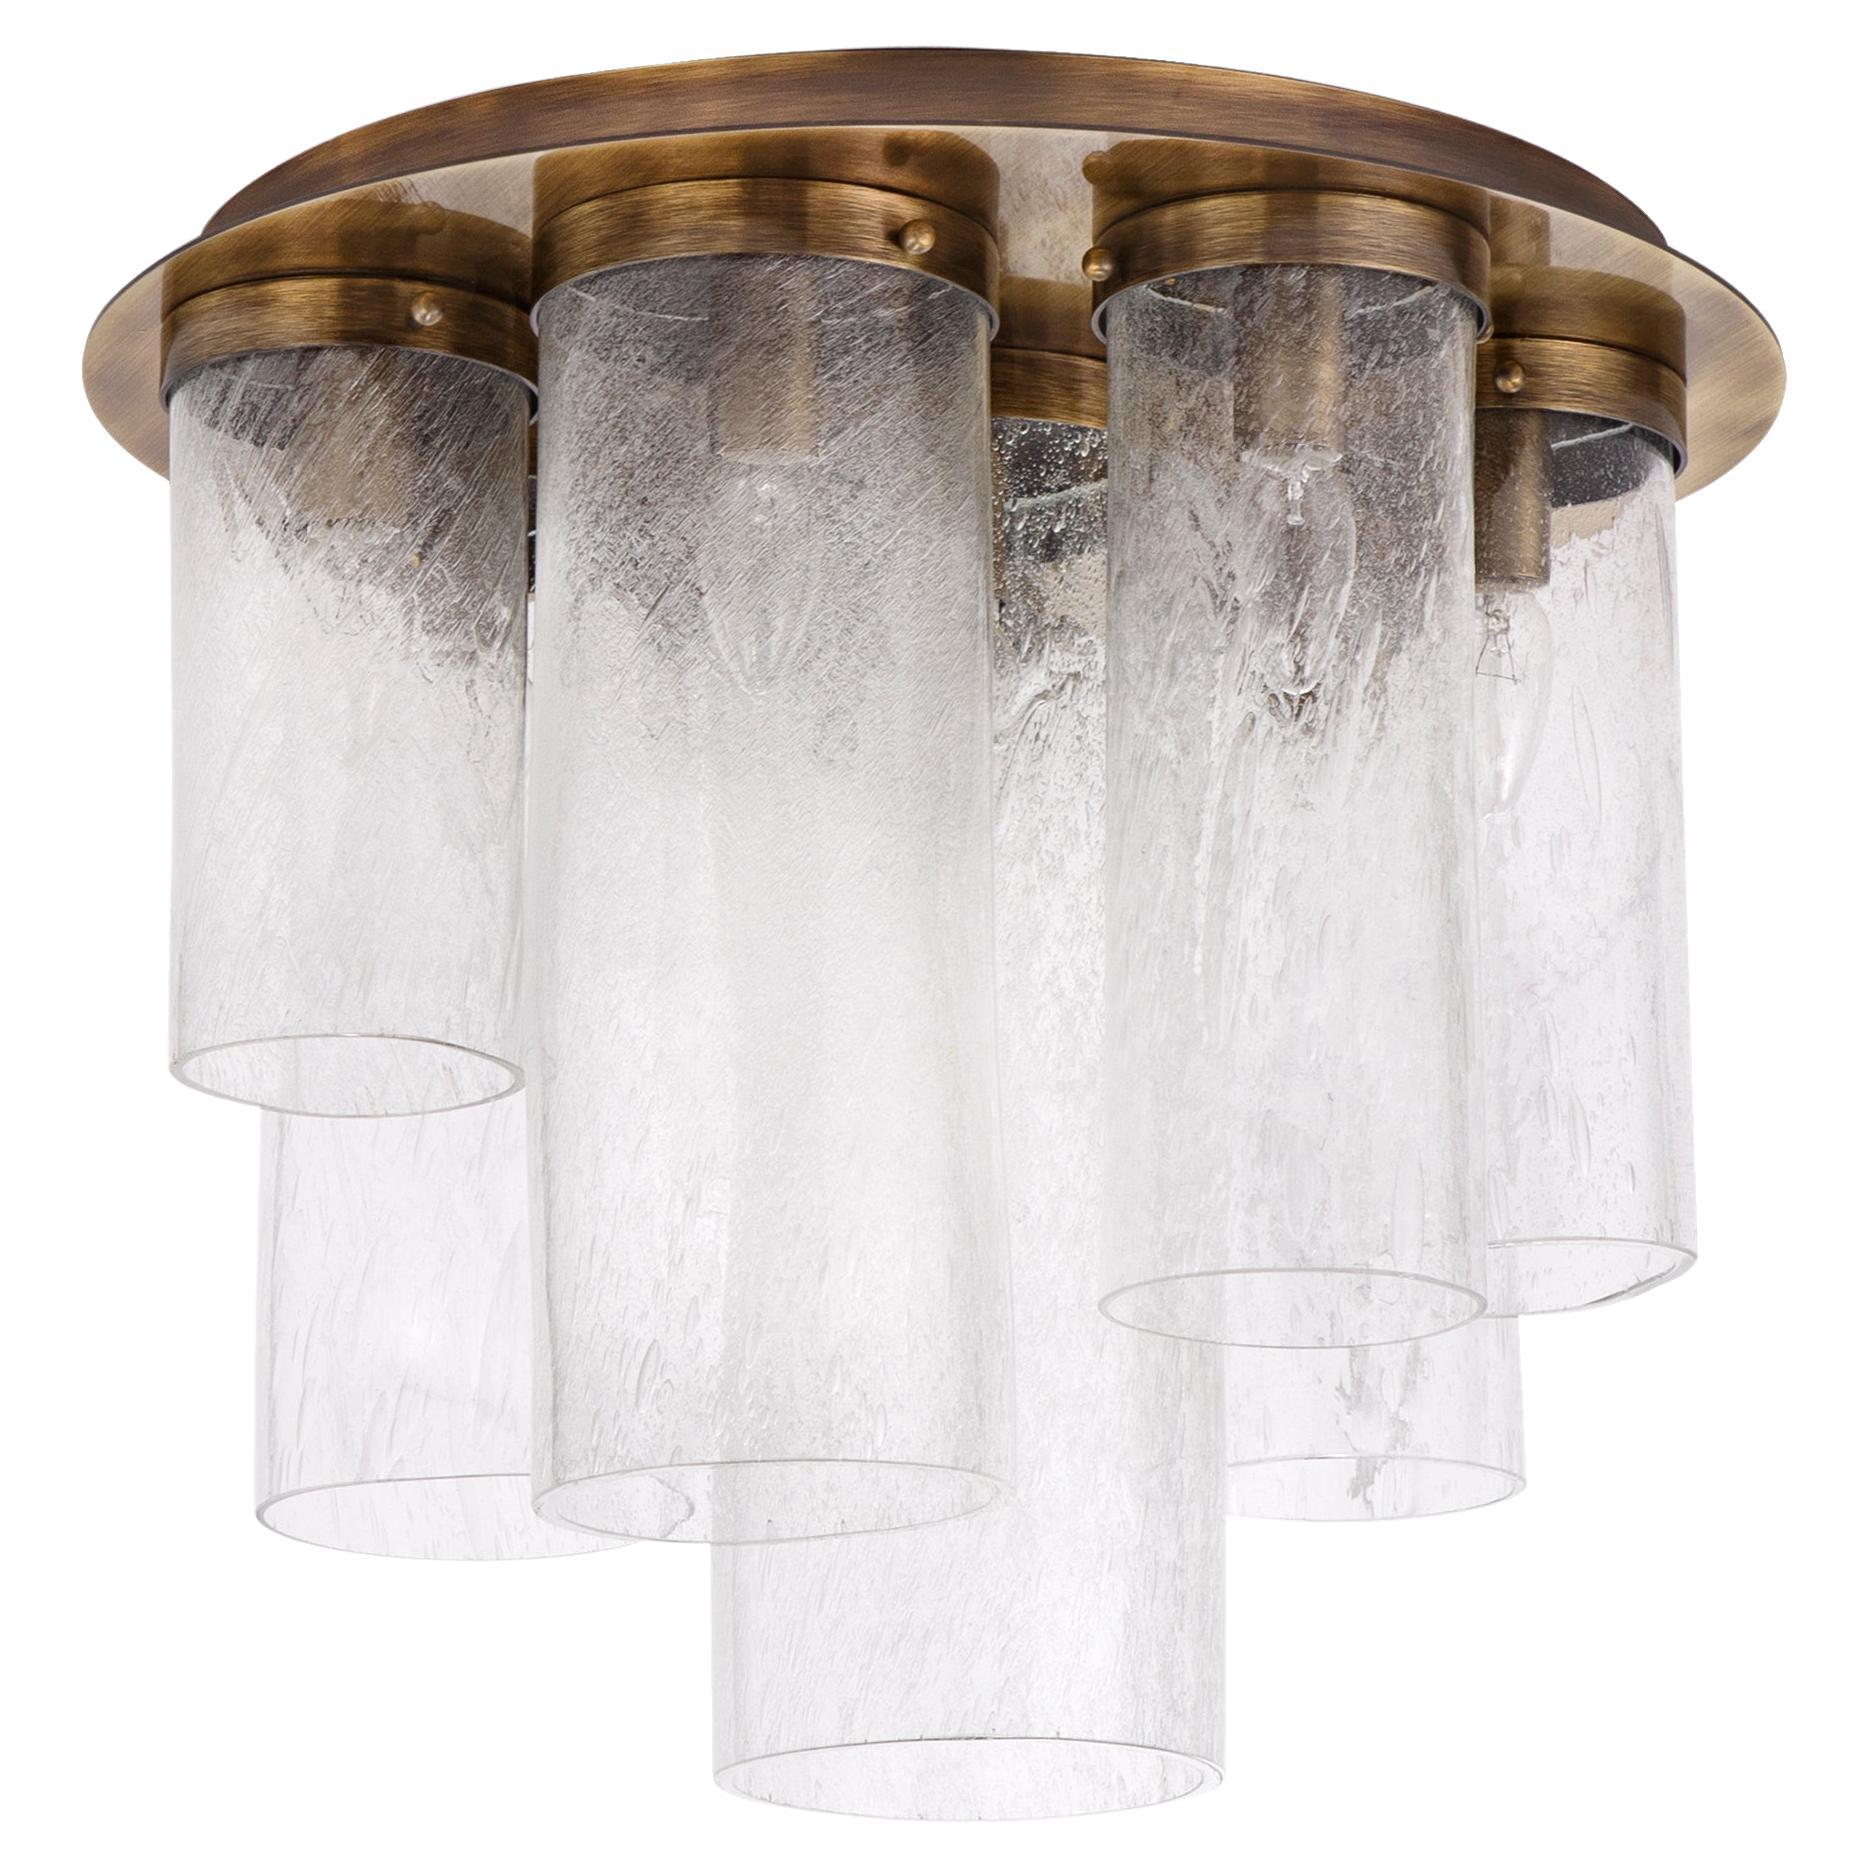 Artistic Ceiling 8clear Glass Tubes, Burnish Brass Fixture Skyline by Multiforme